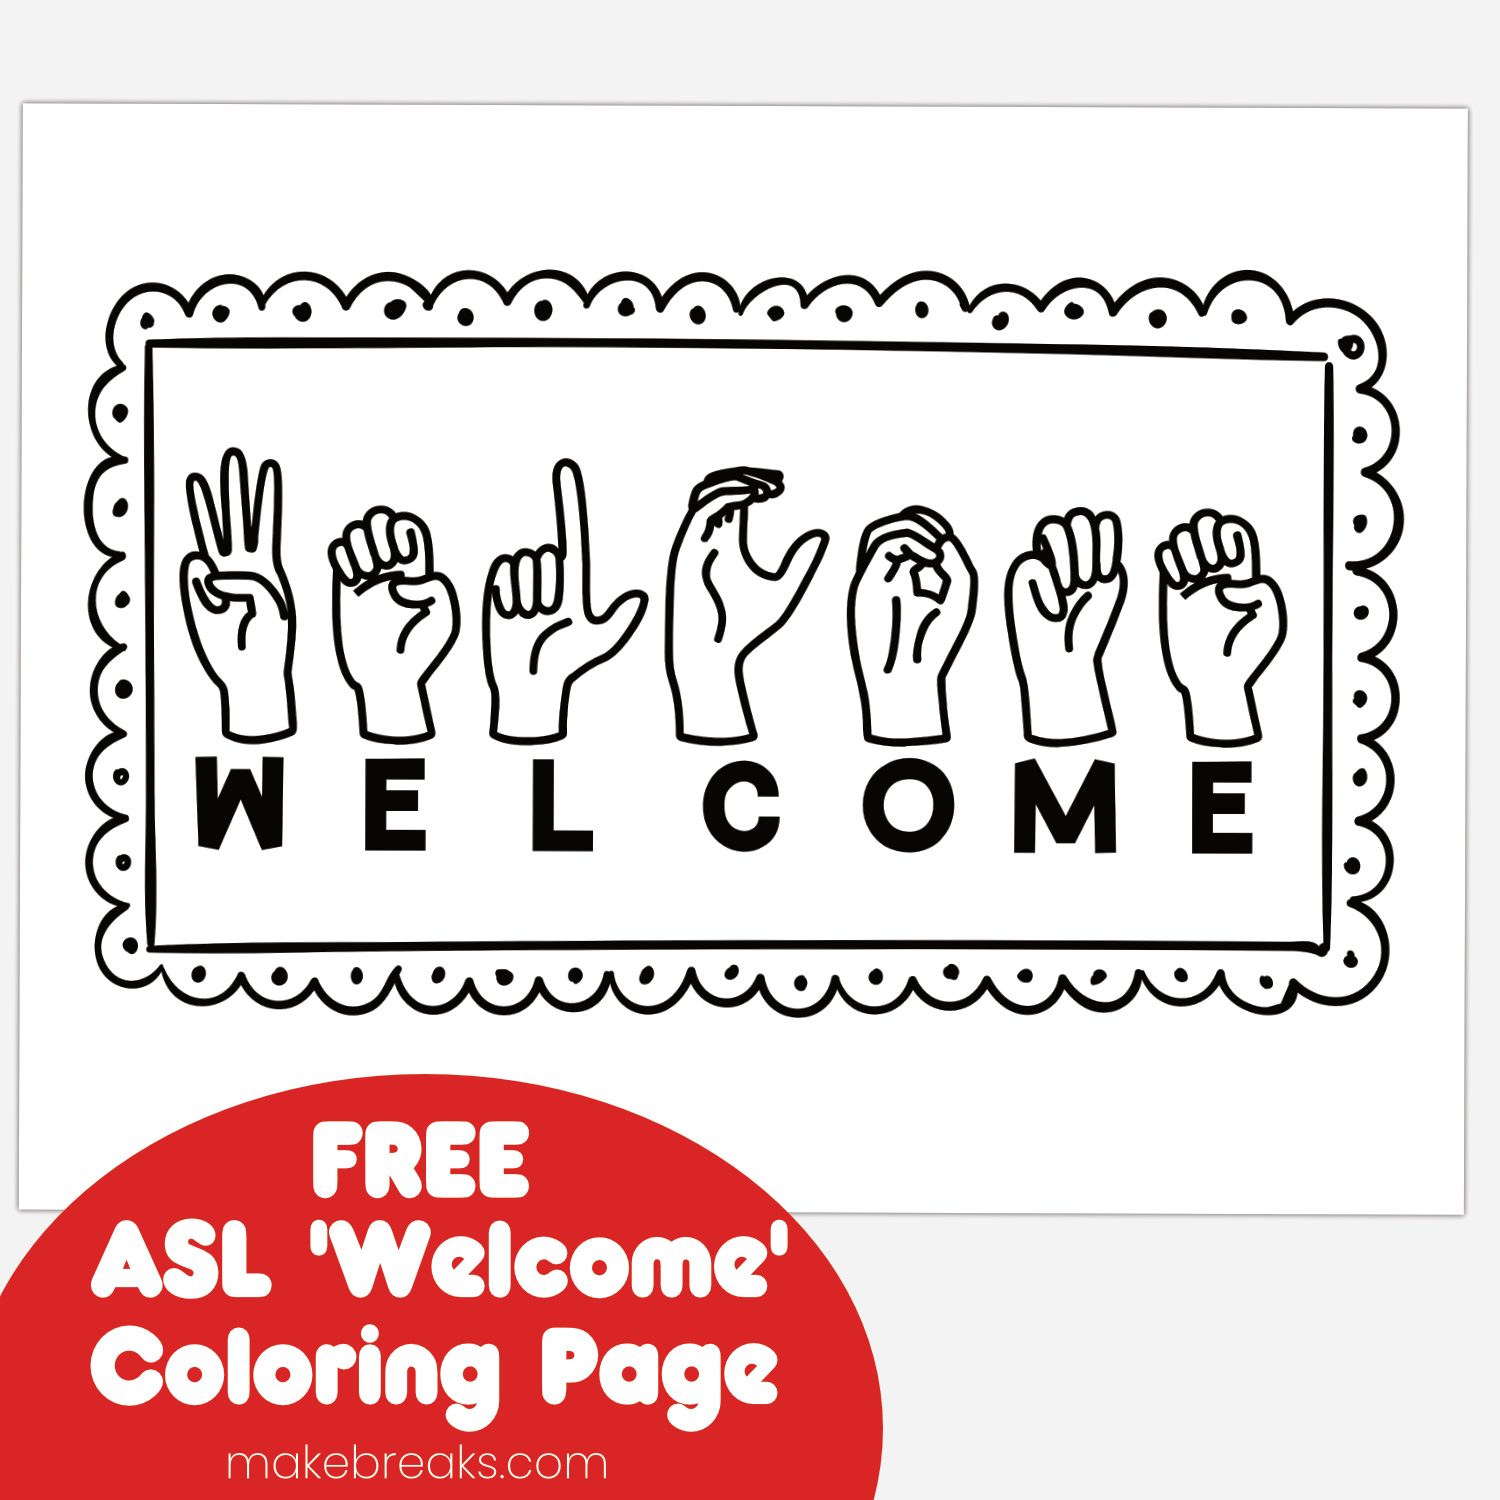 ASL ‘Welcome’ Coloring Page